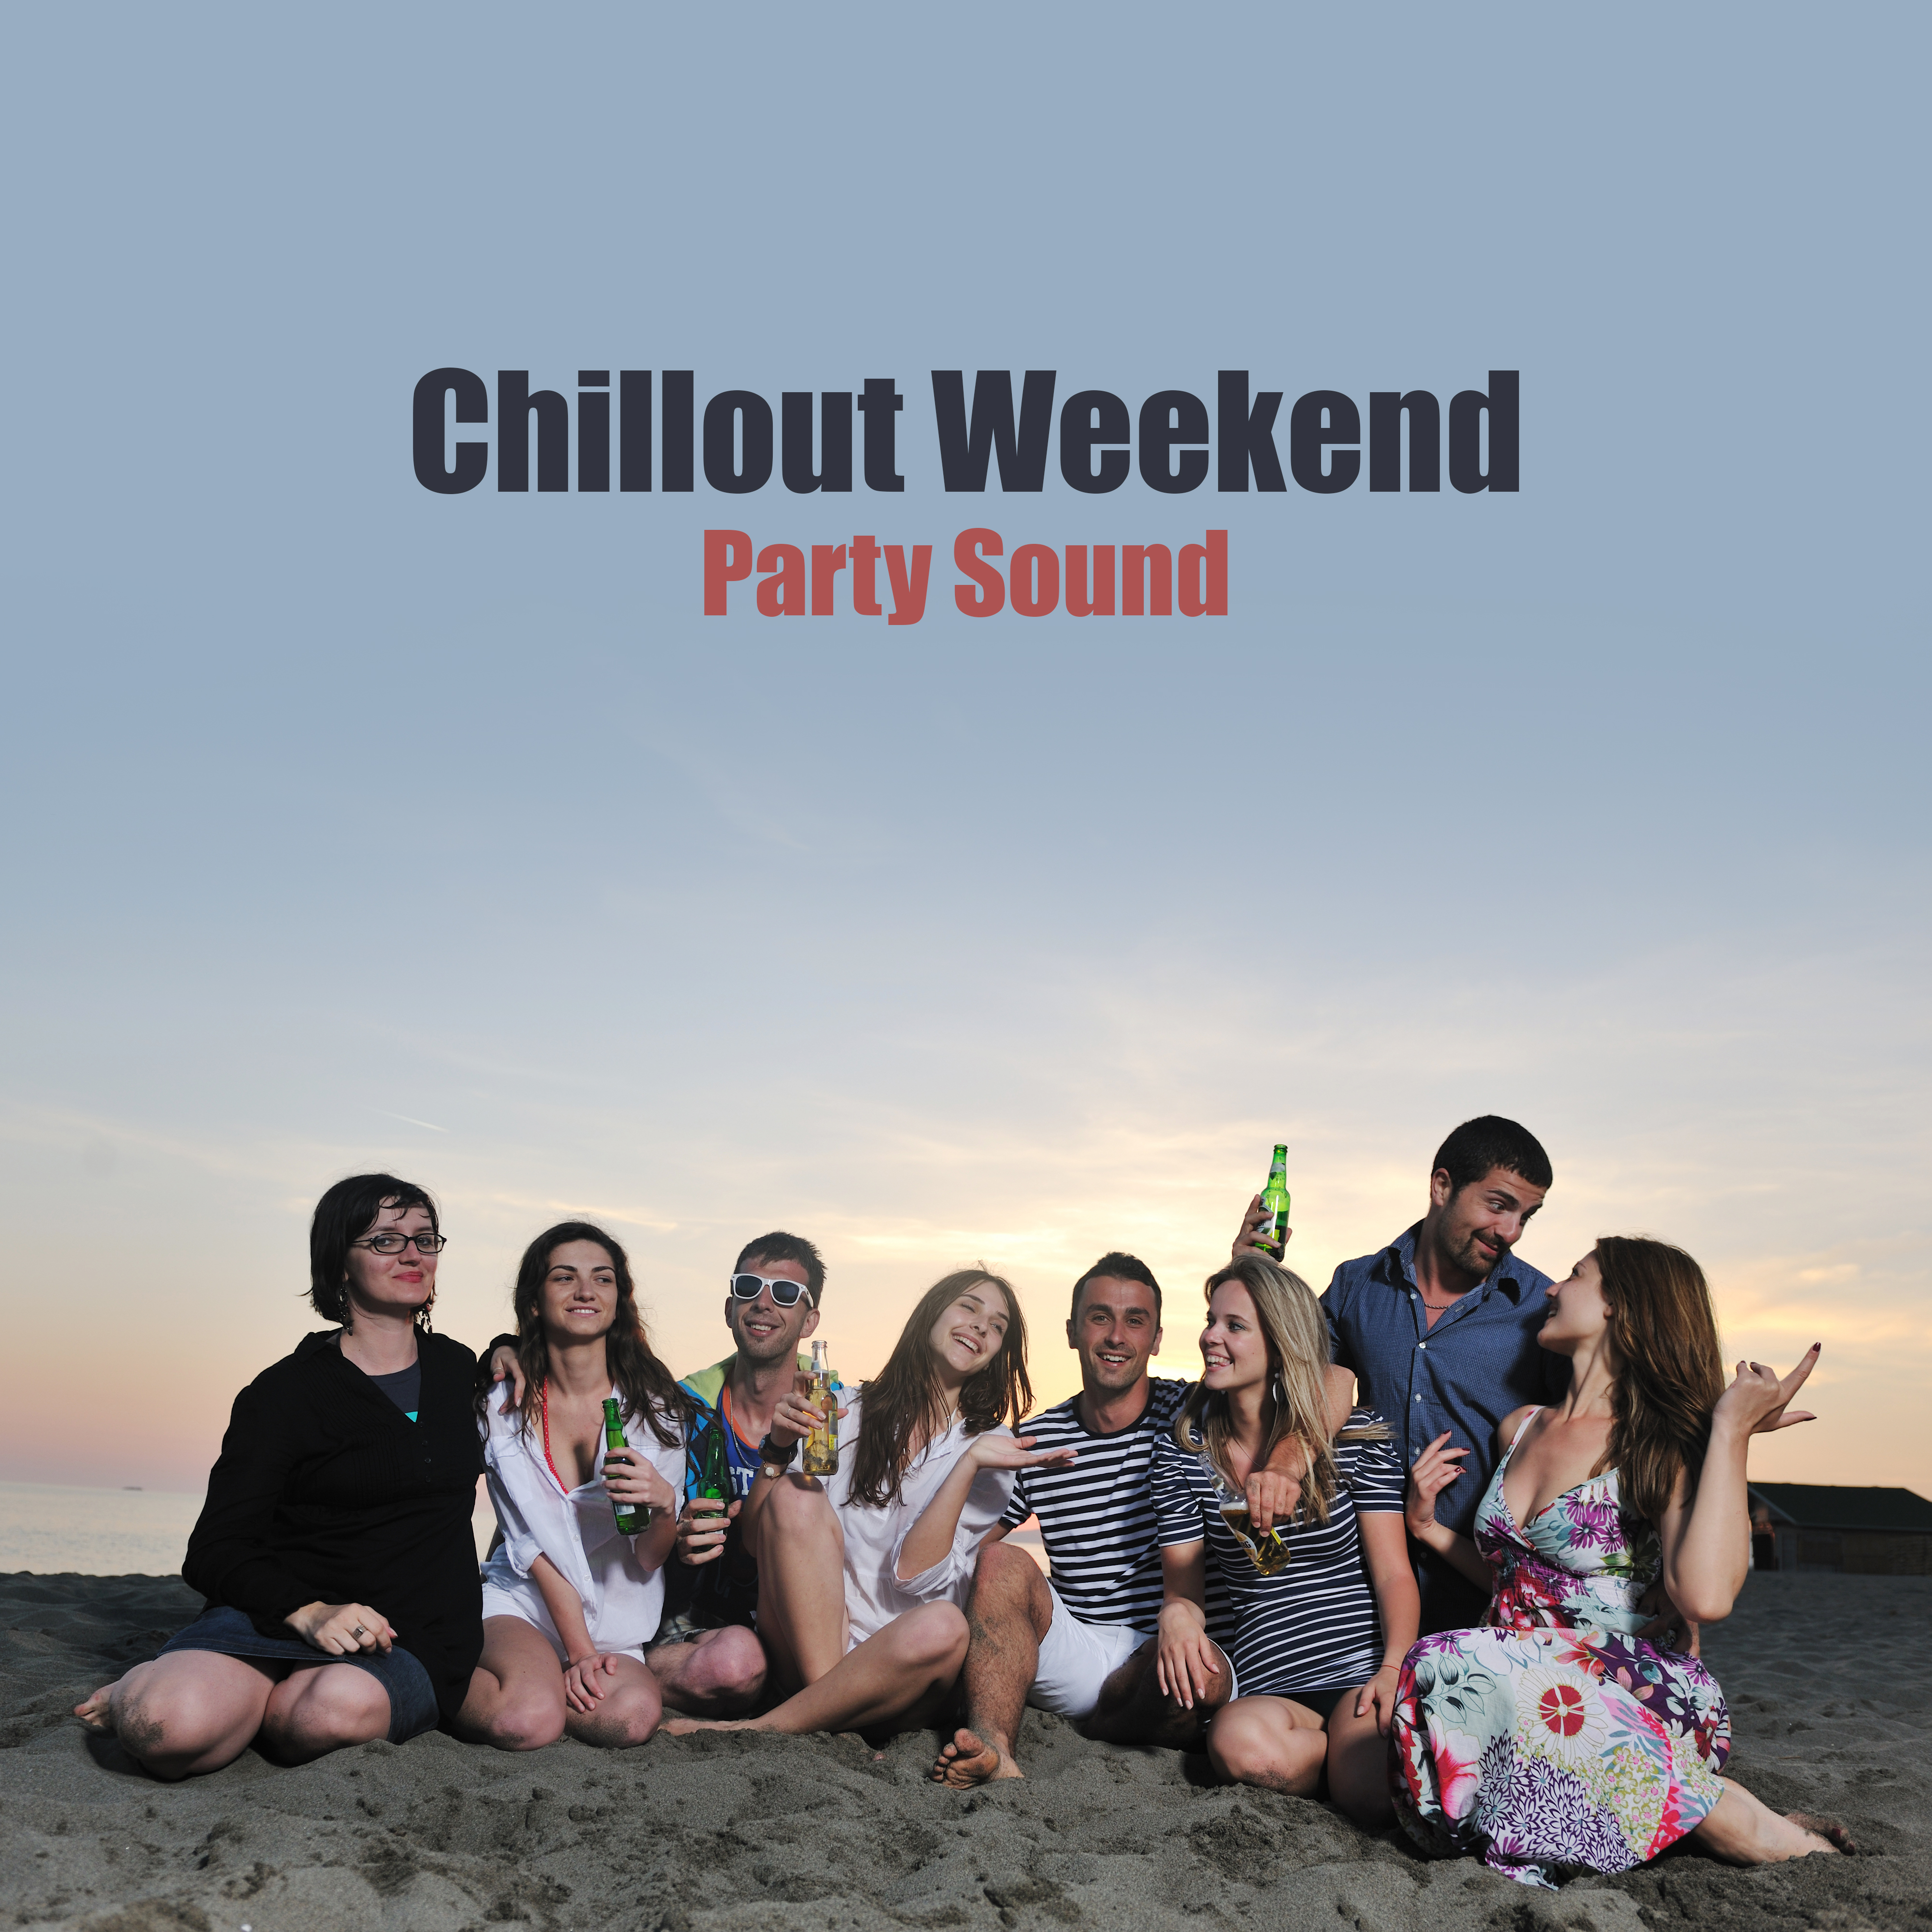 Chillout Weekend Party Sound – Electronic Hot Summer Beats for All Night Long Dance Party